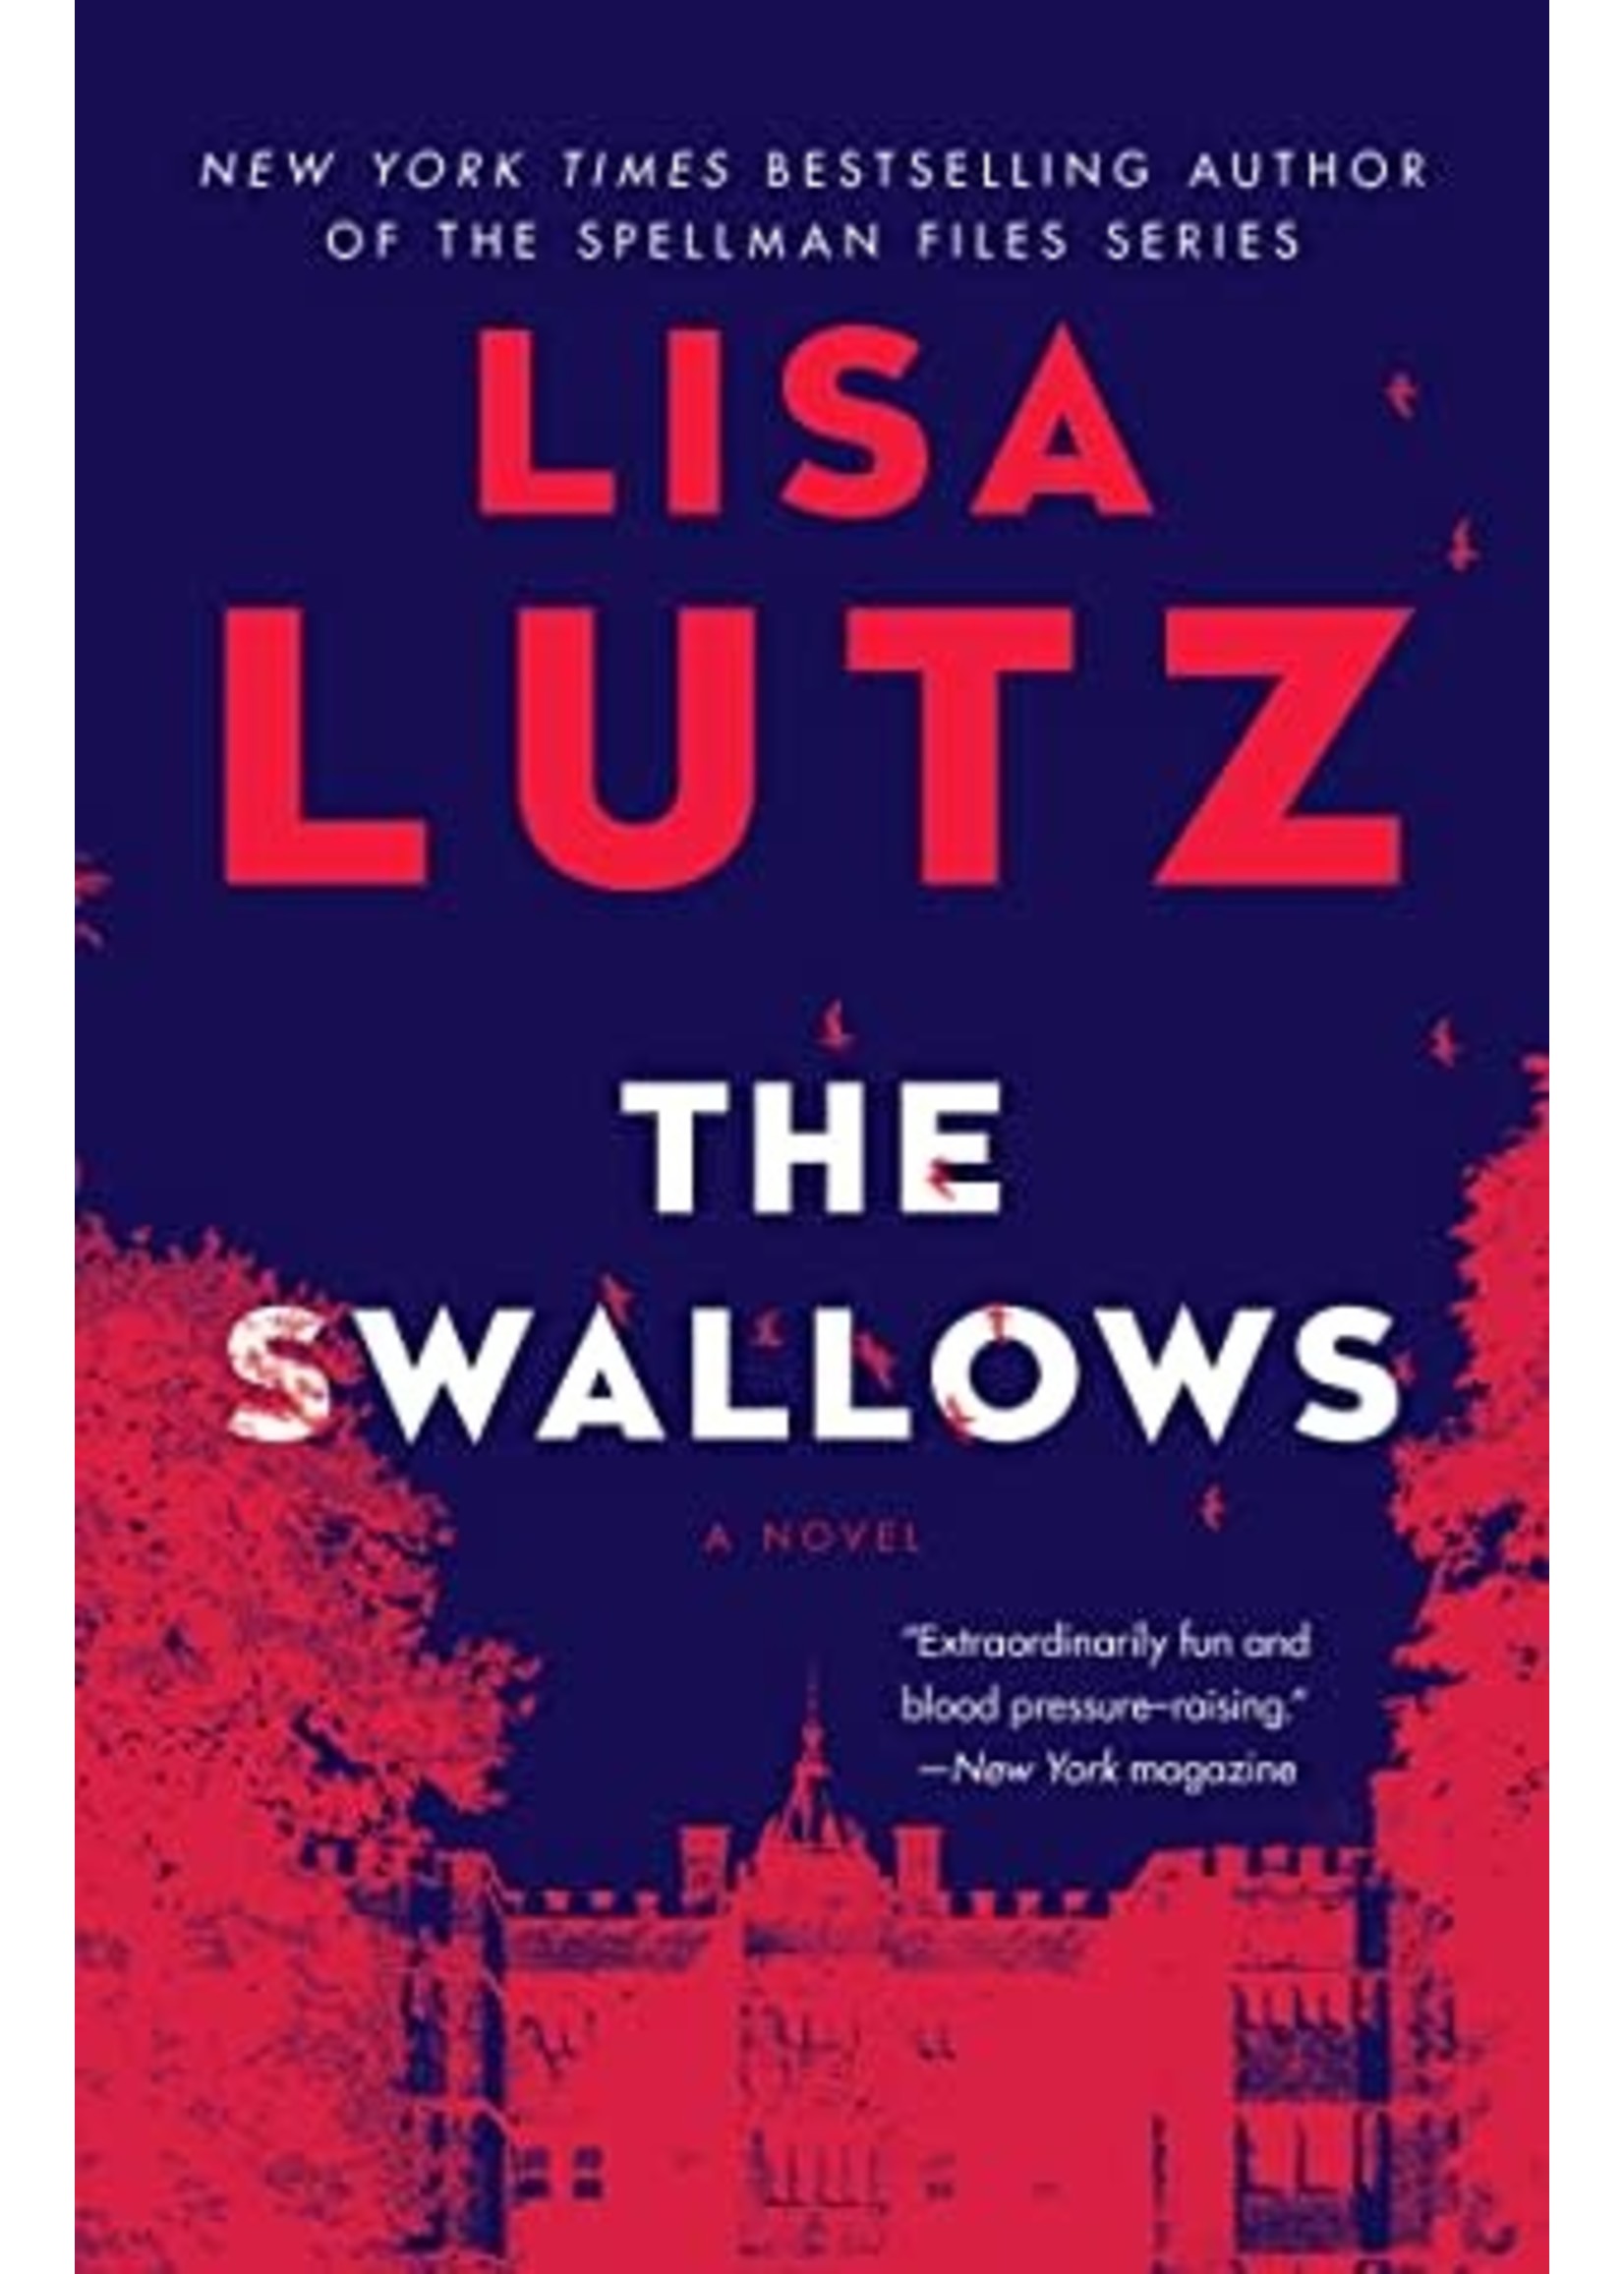 The Swallows: A Novel by Lisa Lutz